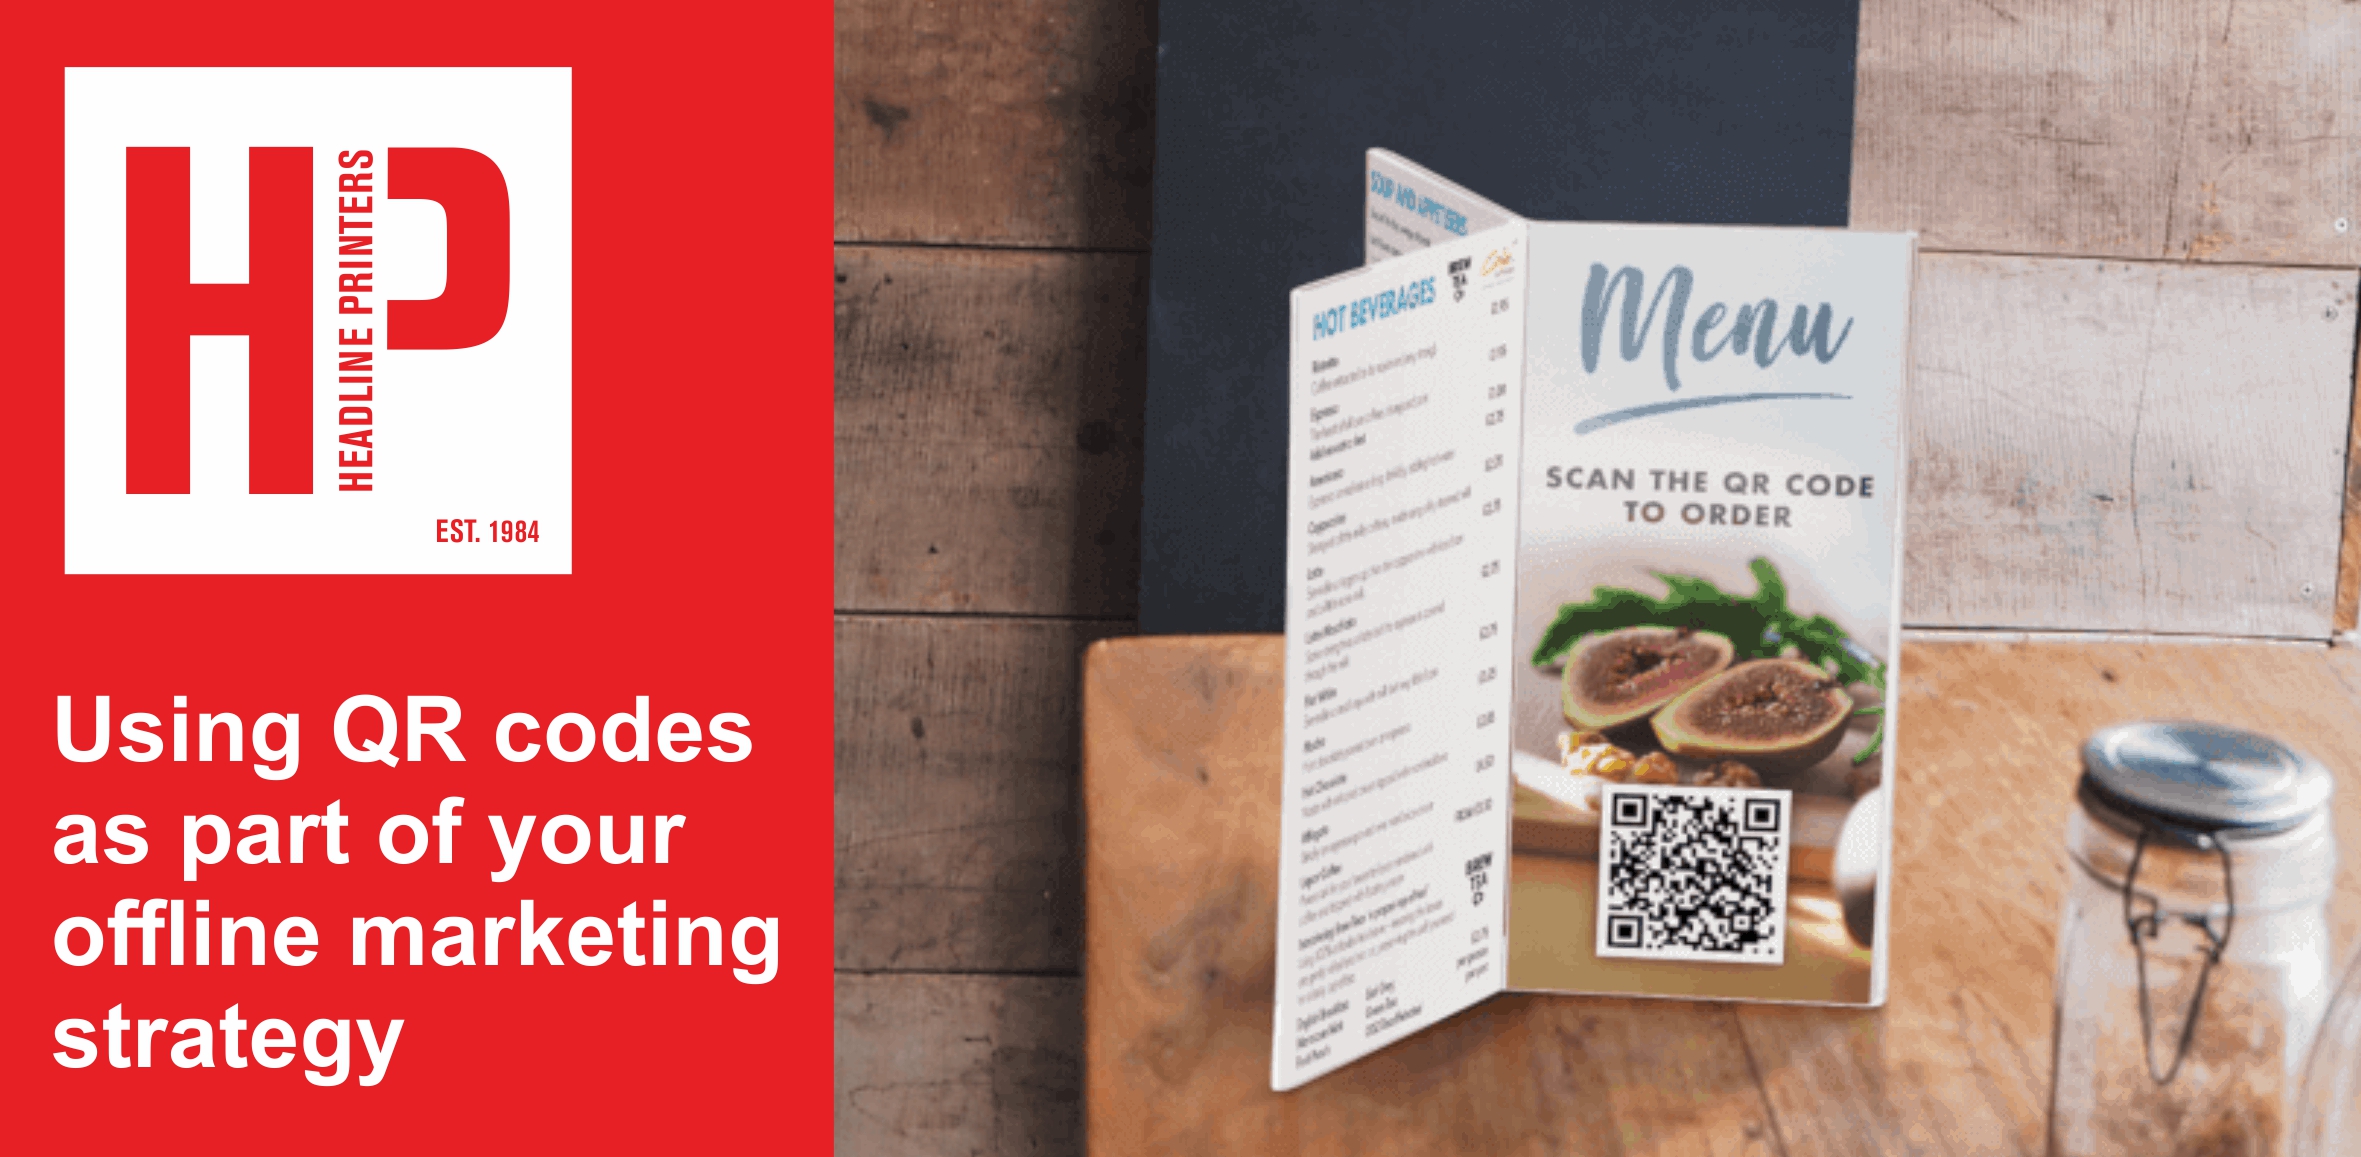 Using QR codes as part of your offline marketing strategy